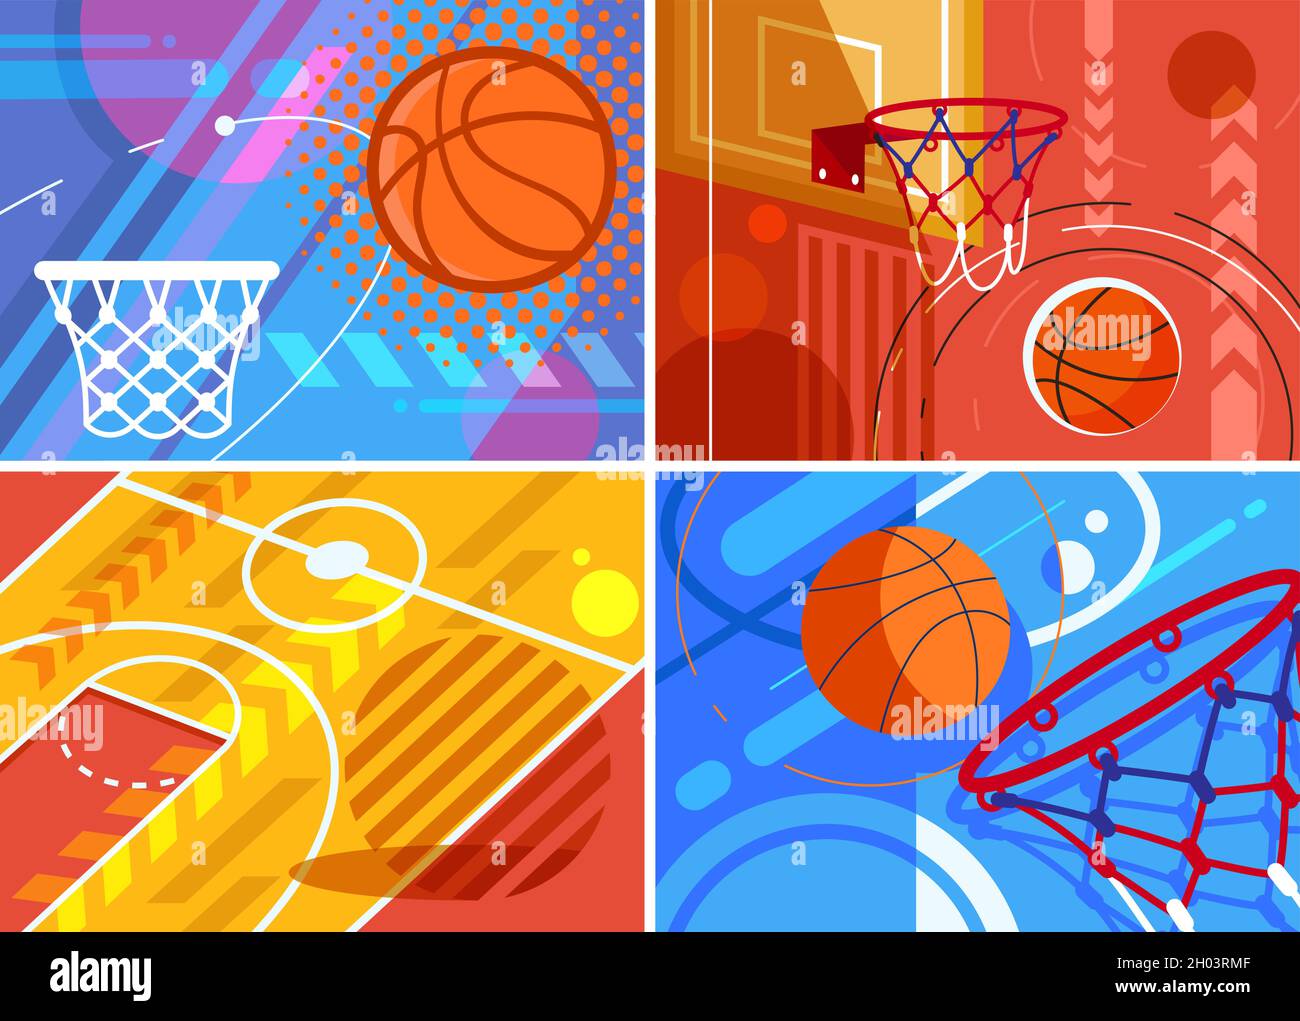 Collection of basketball banners. Placard designs in flat style. Stock Vector